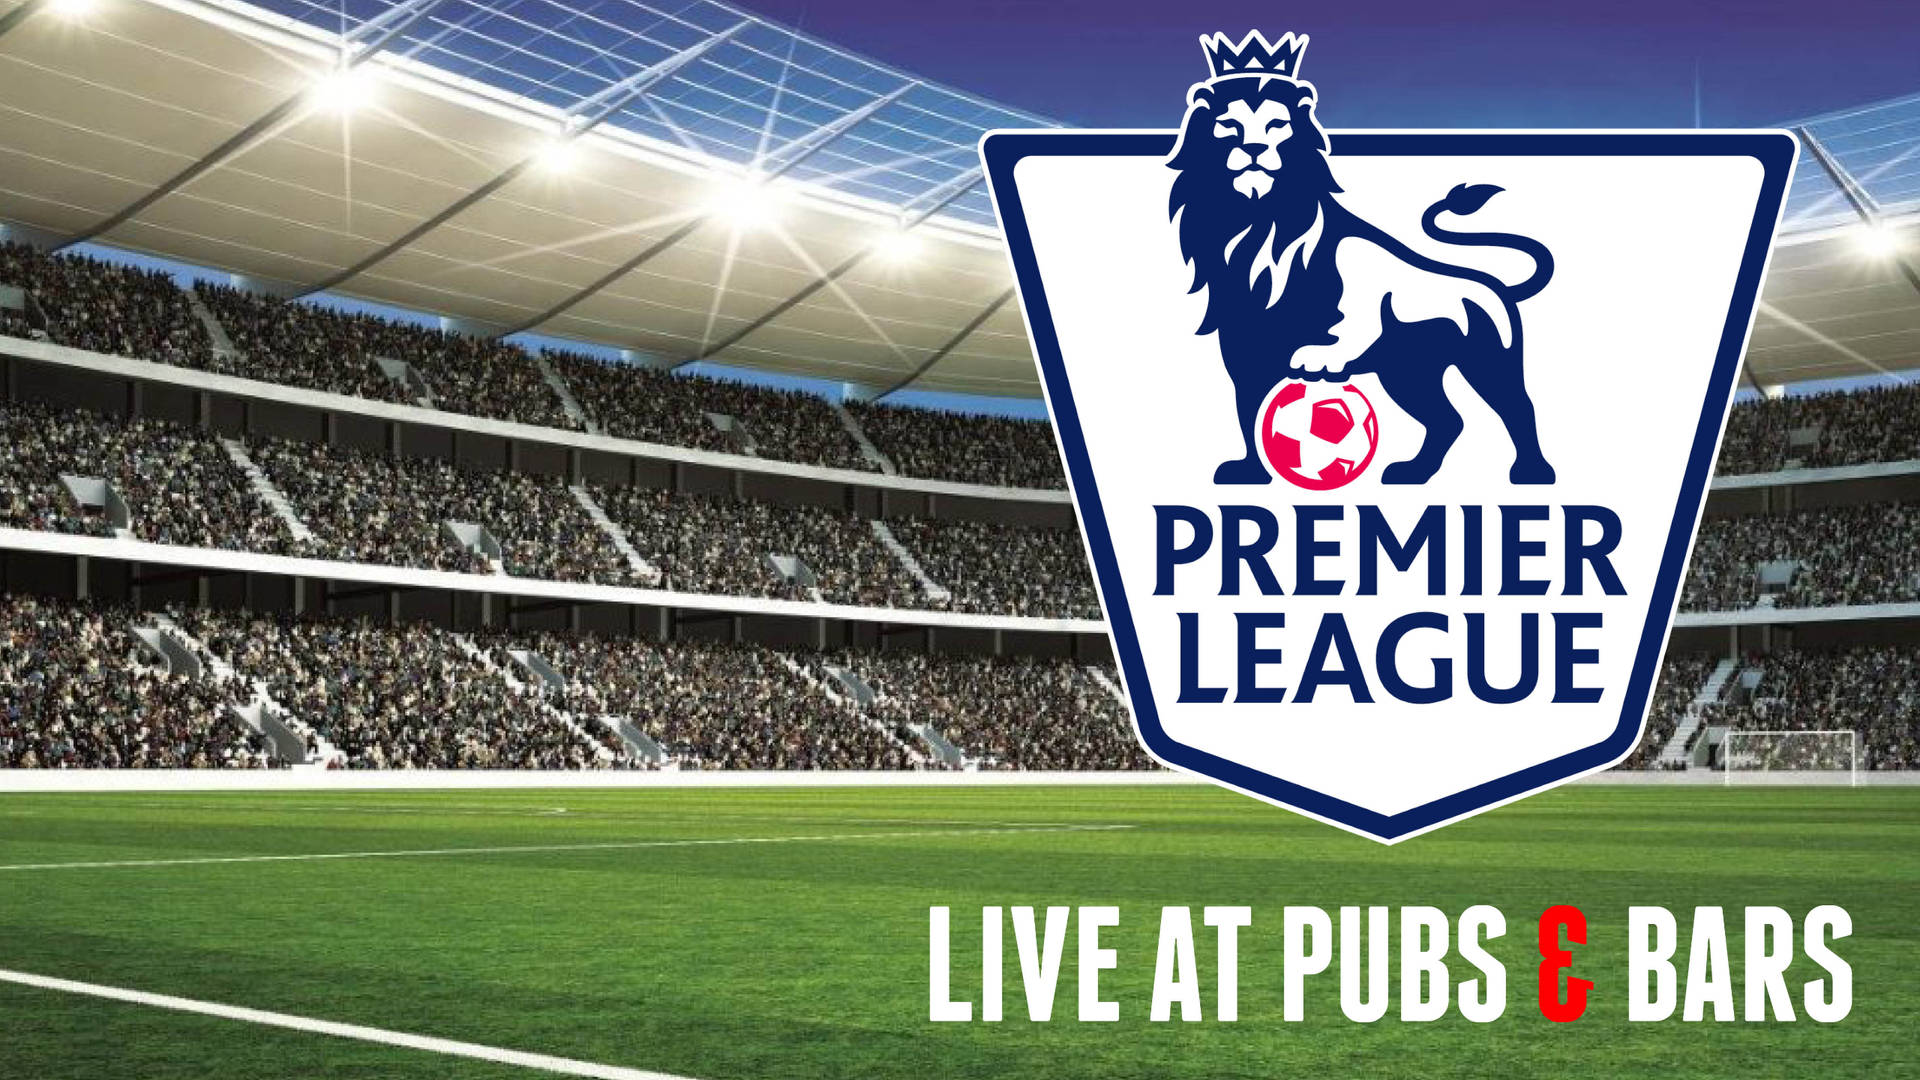 Premier League In Arena Cover Background